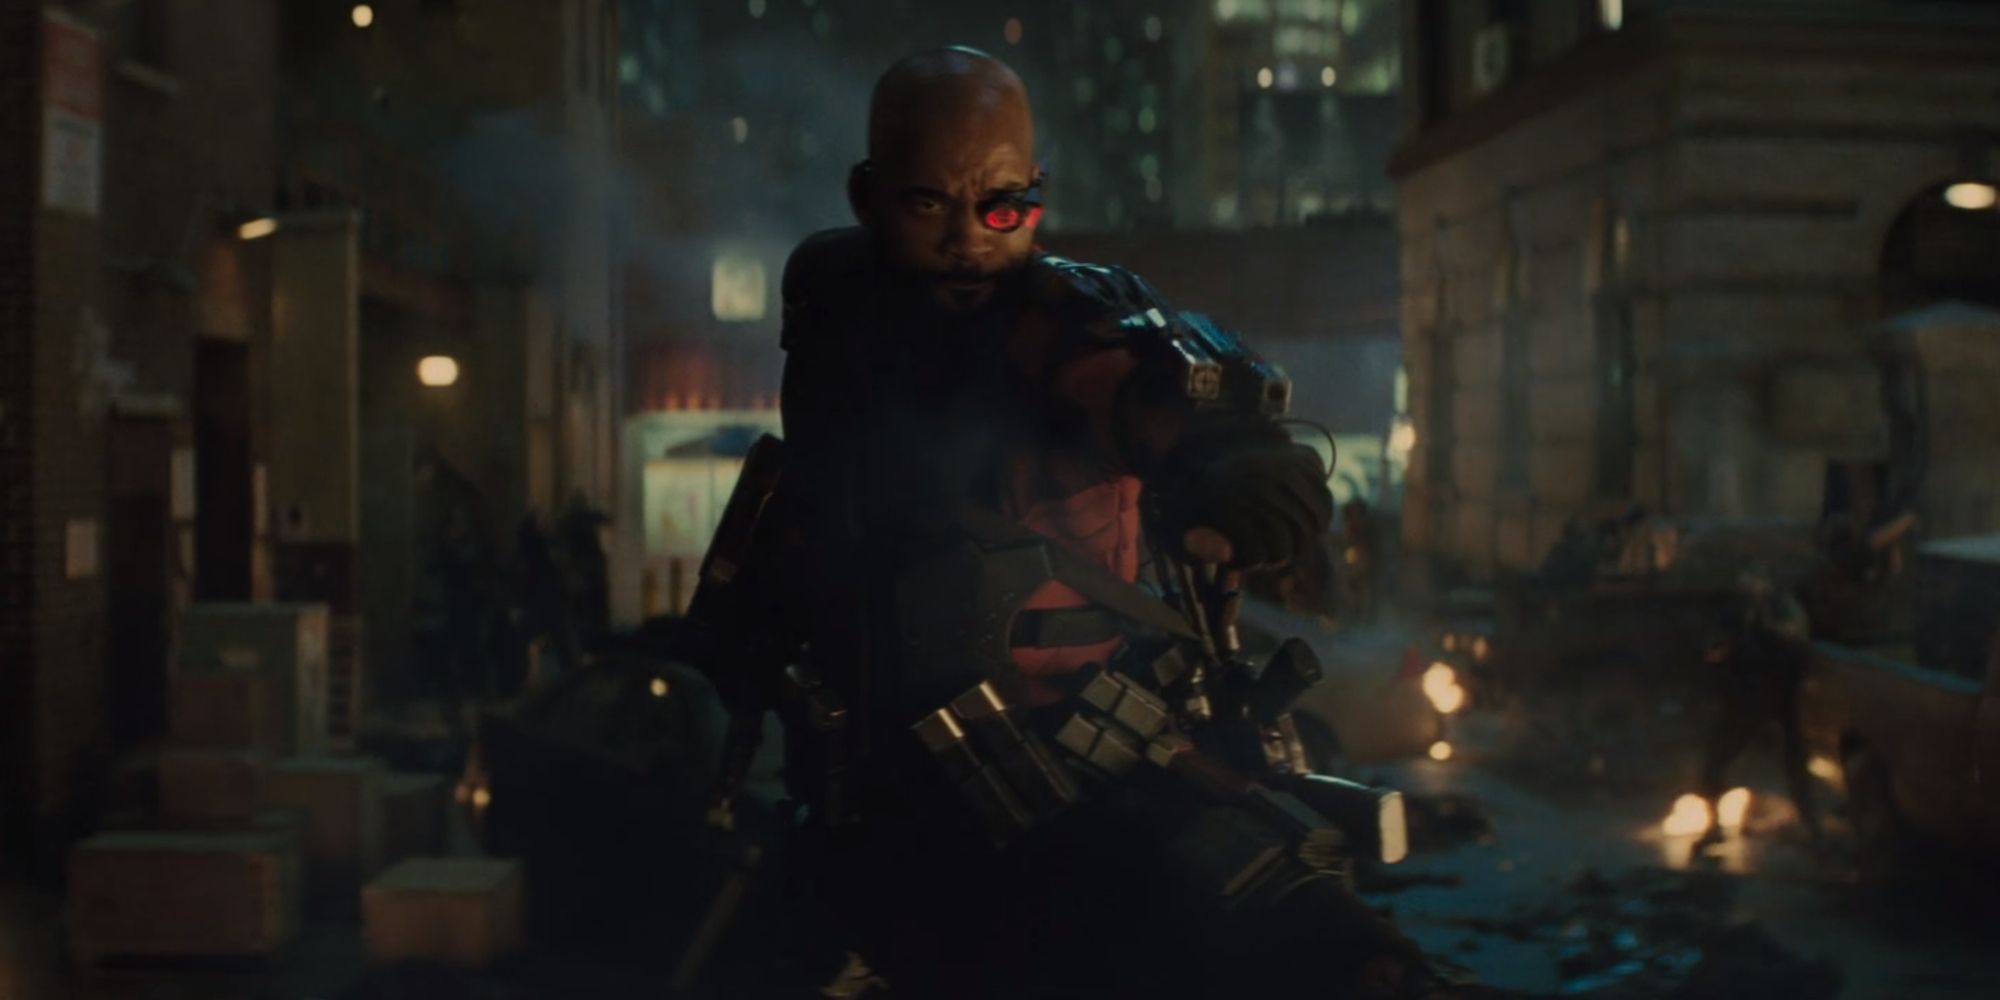 Deadshot on a car fighting zombies with his wrist guns in Suicide Squad (2016).